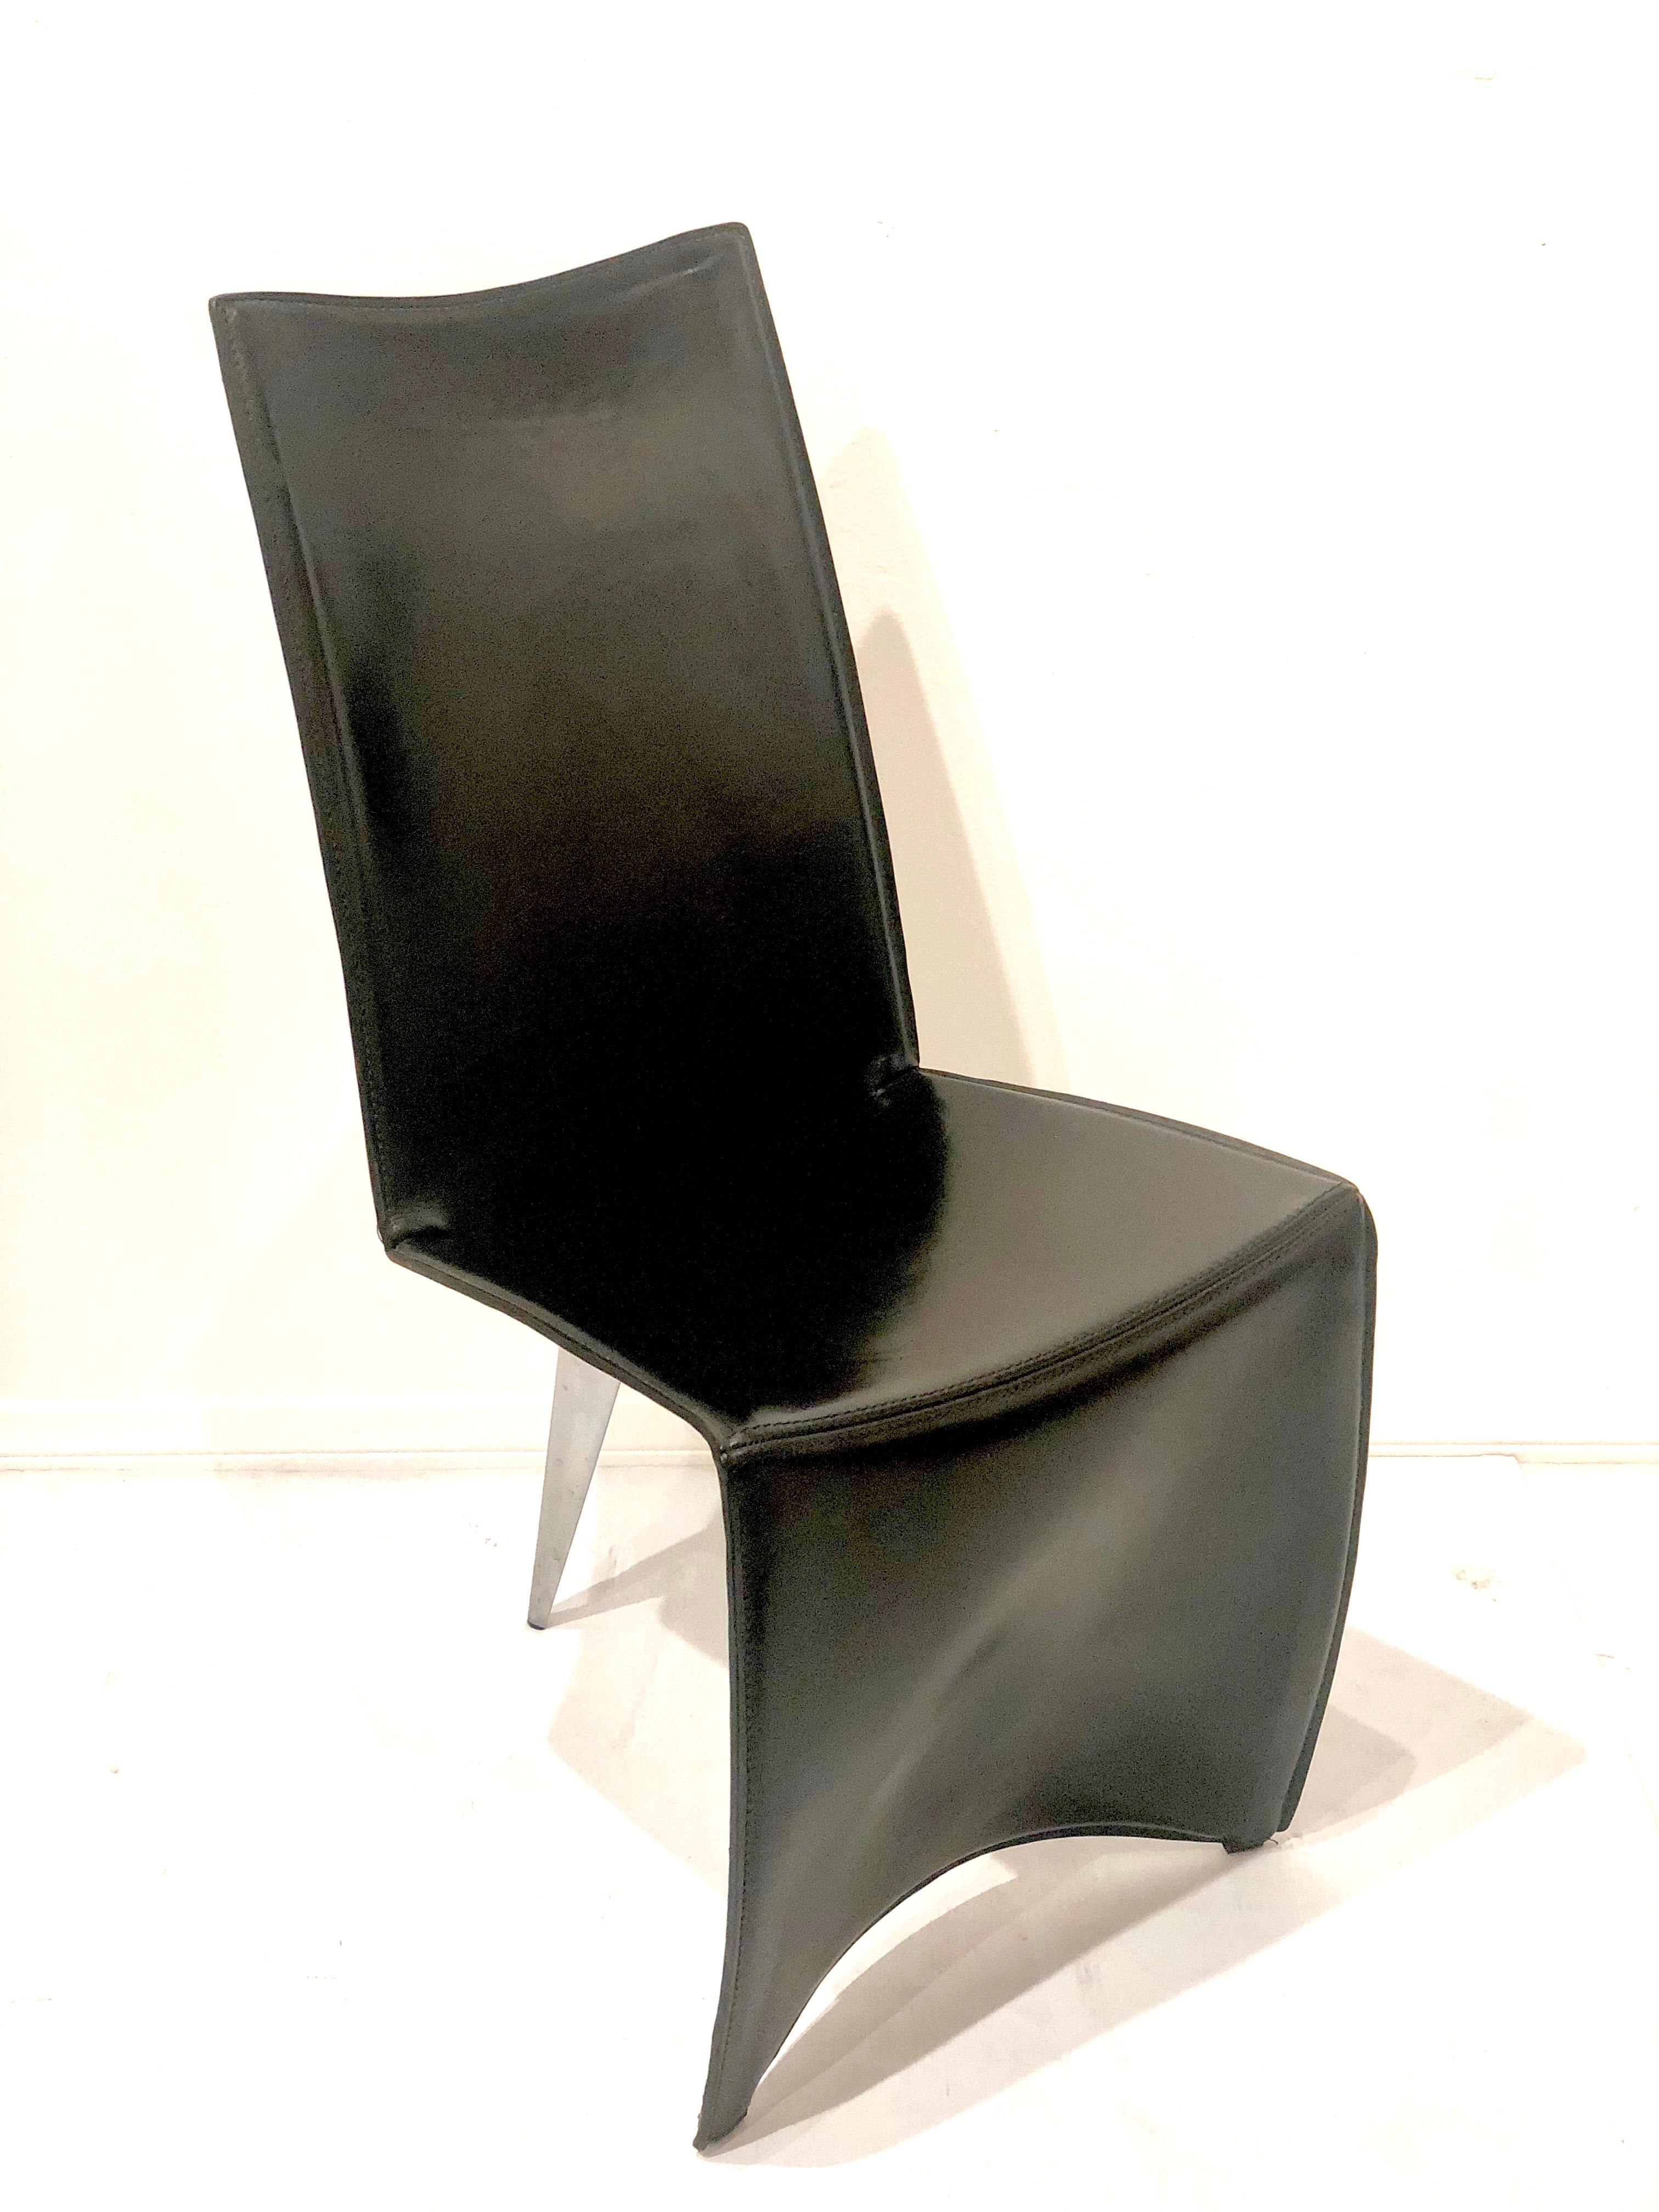 Elegant piece of art chair by Philippe Starck for Driade, circa 1987 in black leather , and polished aluminum back leg.